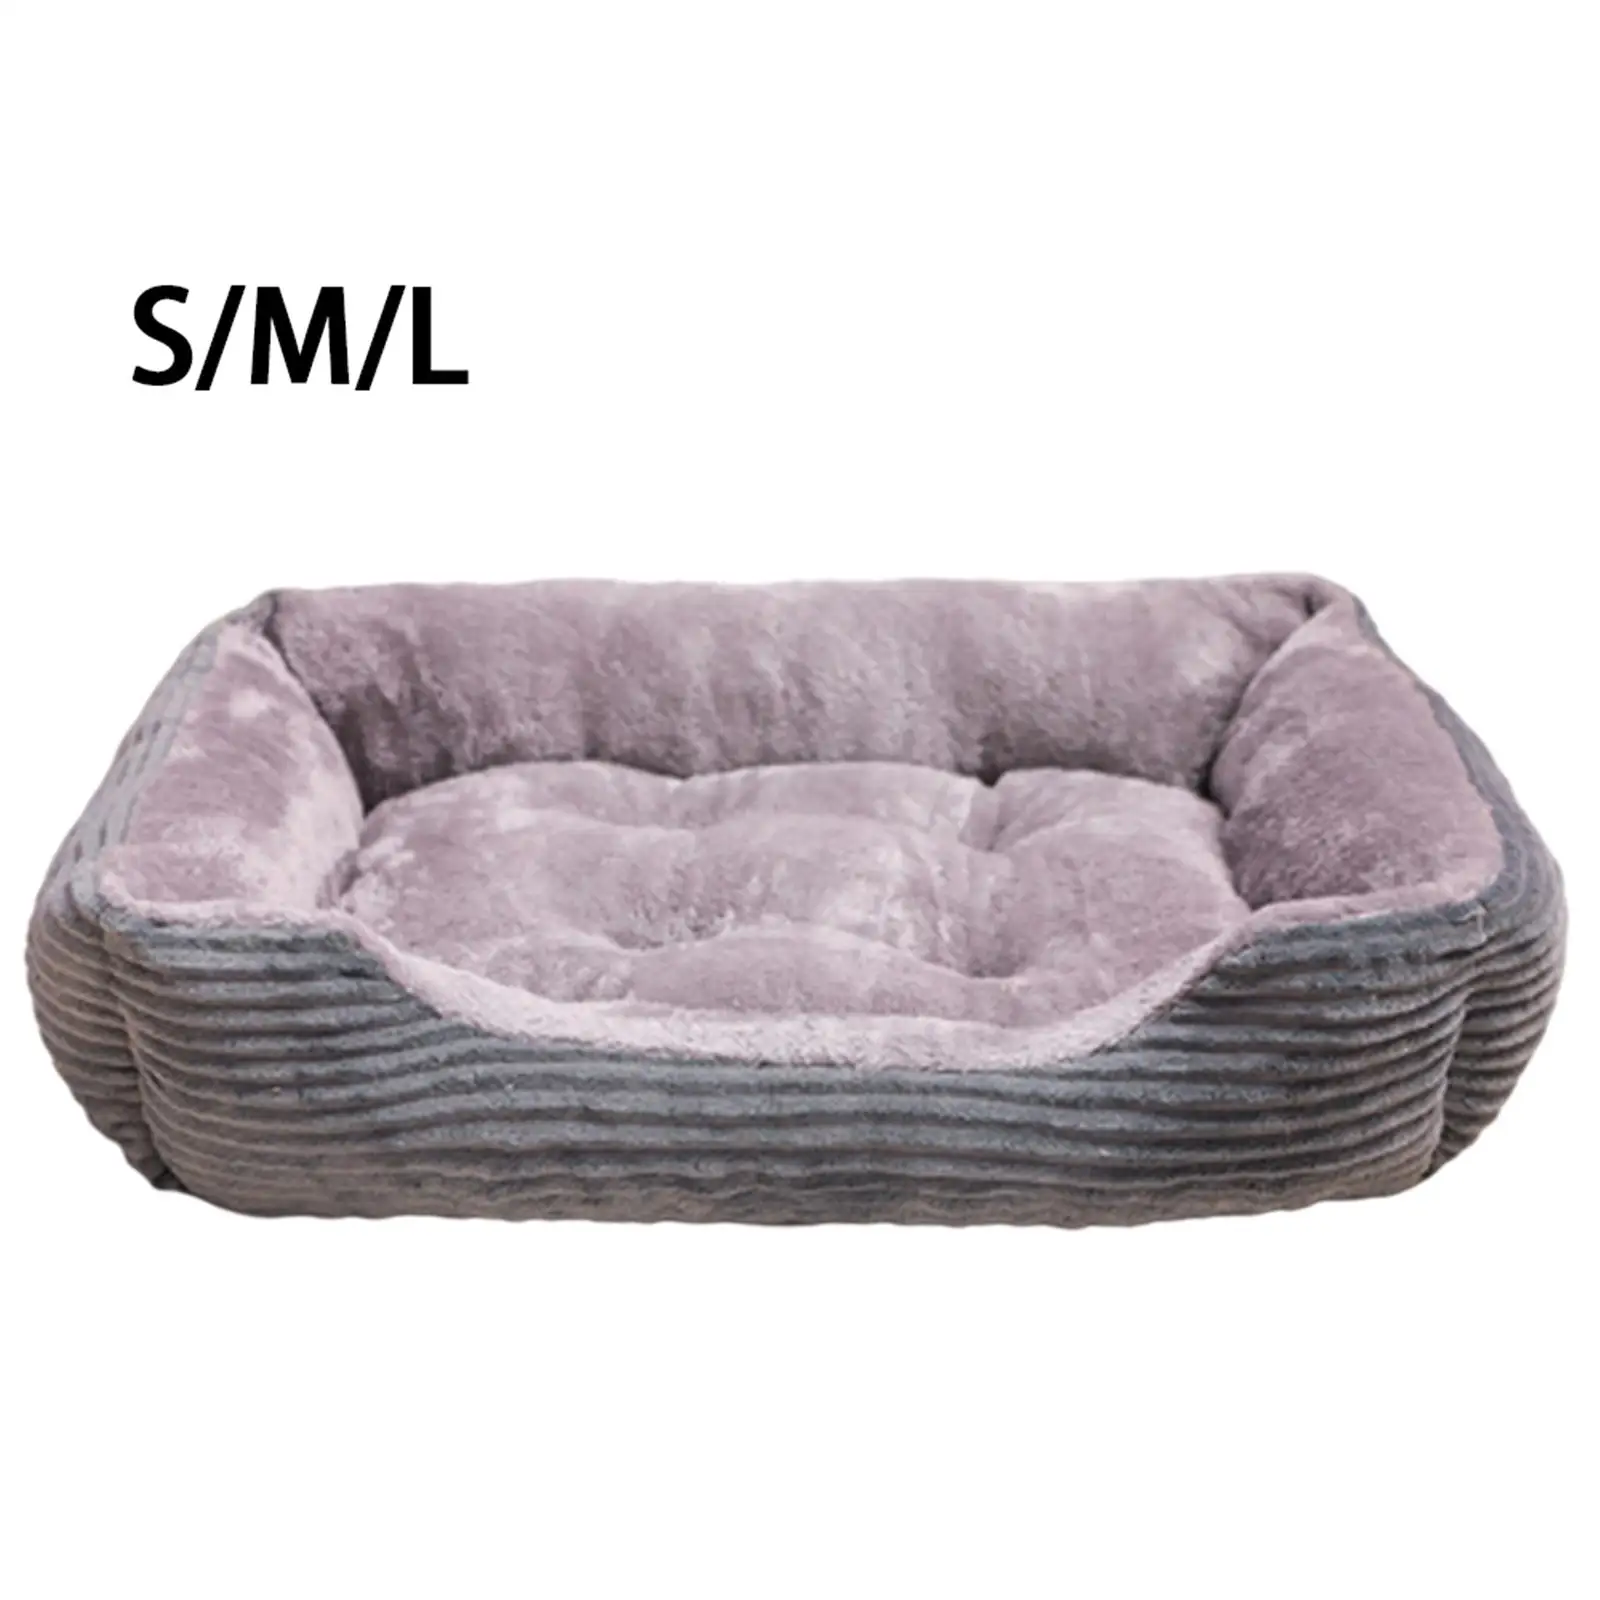 

Pet Dog Cat Bed Plush Rectangle Comfy Winter Warm Nest Bed Cushion Easy Clean Pets Supplies Grey Warm Kennel Puppy for Tent Home